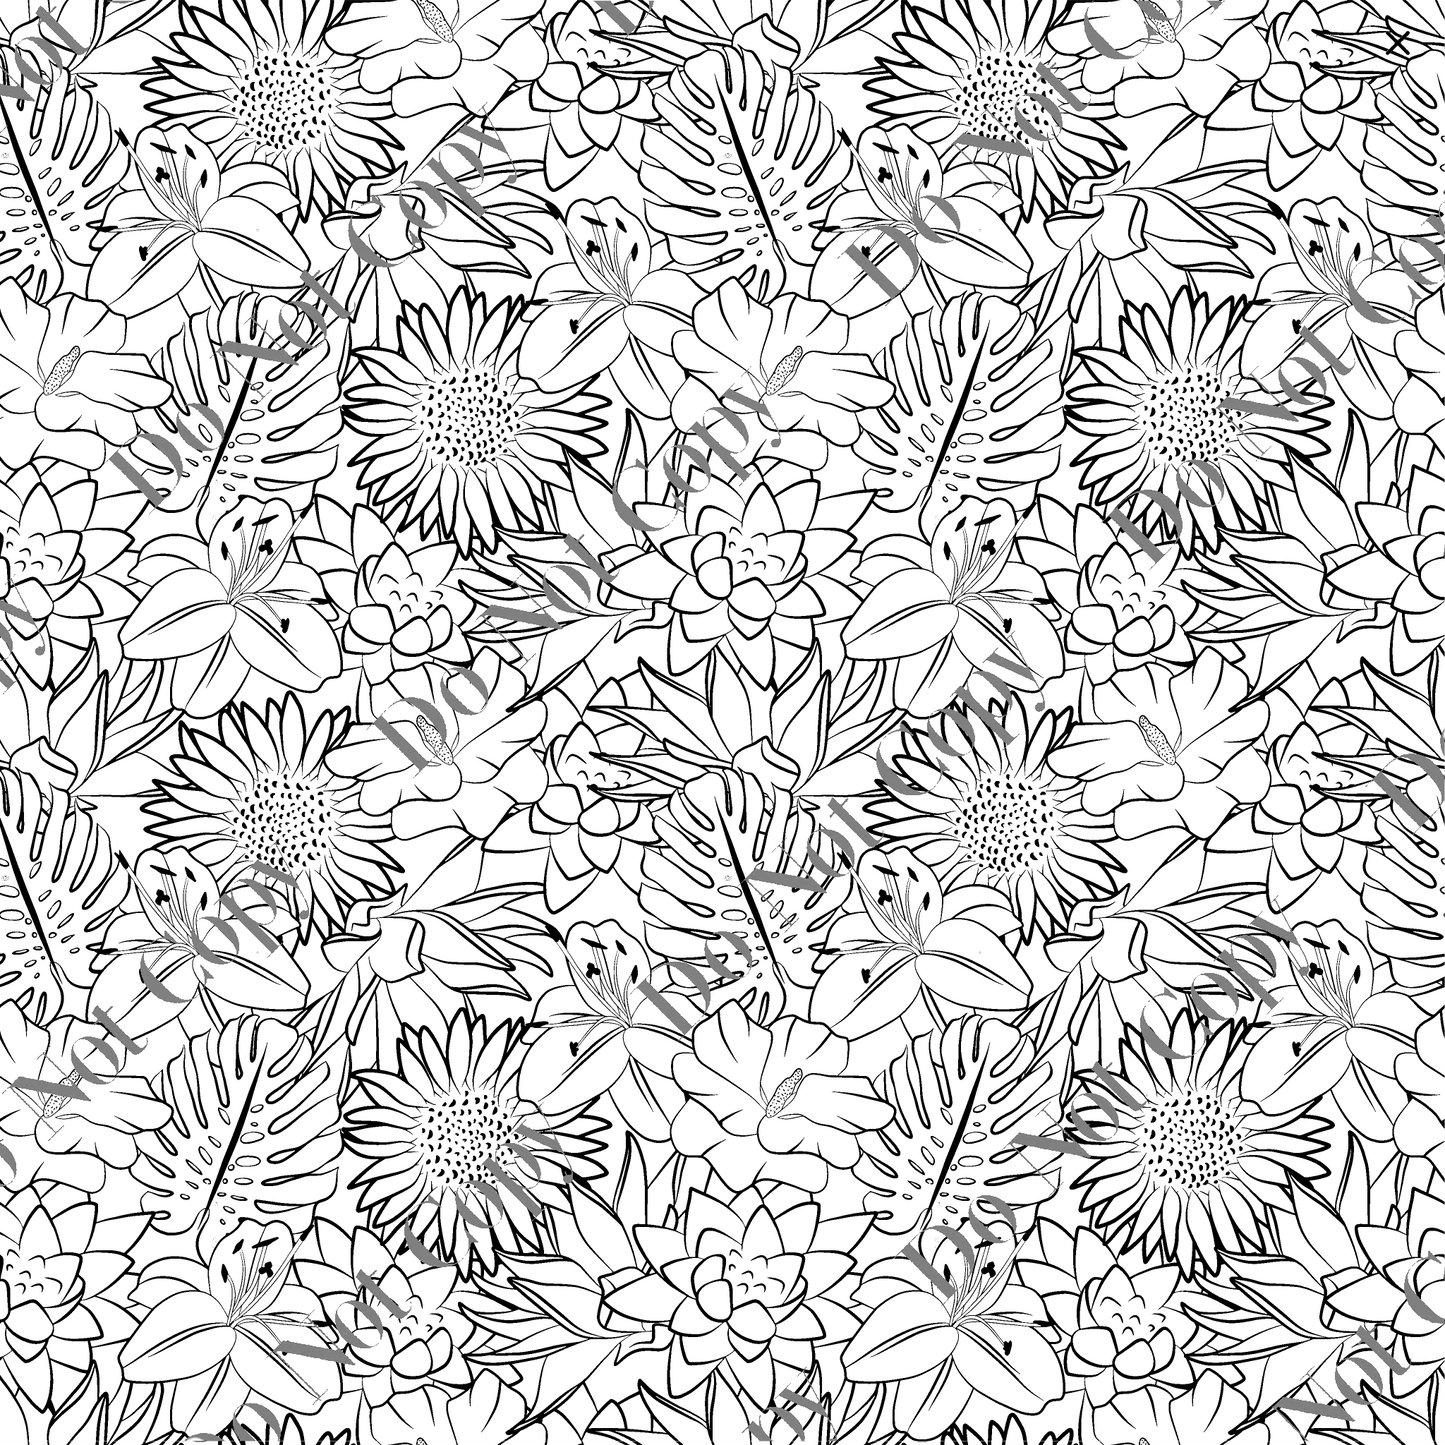 Patterned Vinyl - Lily Line Drawing